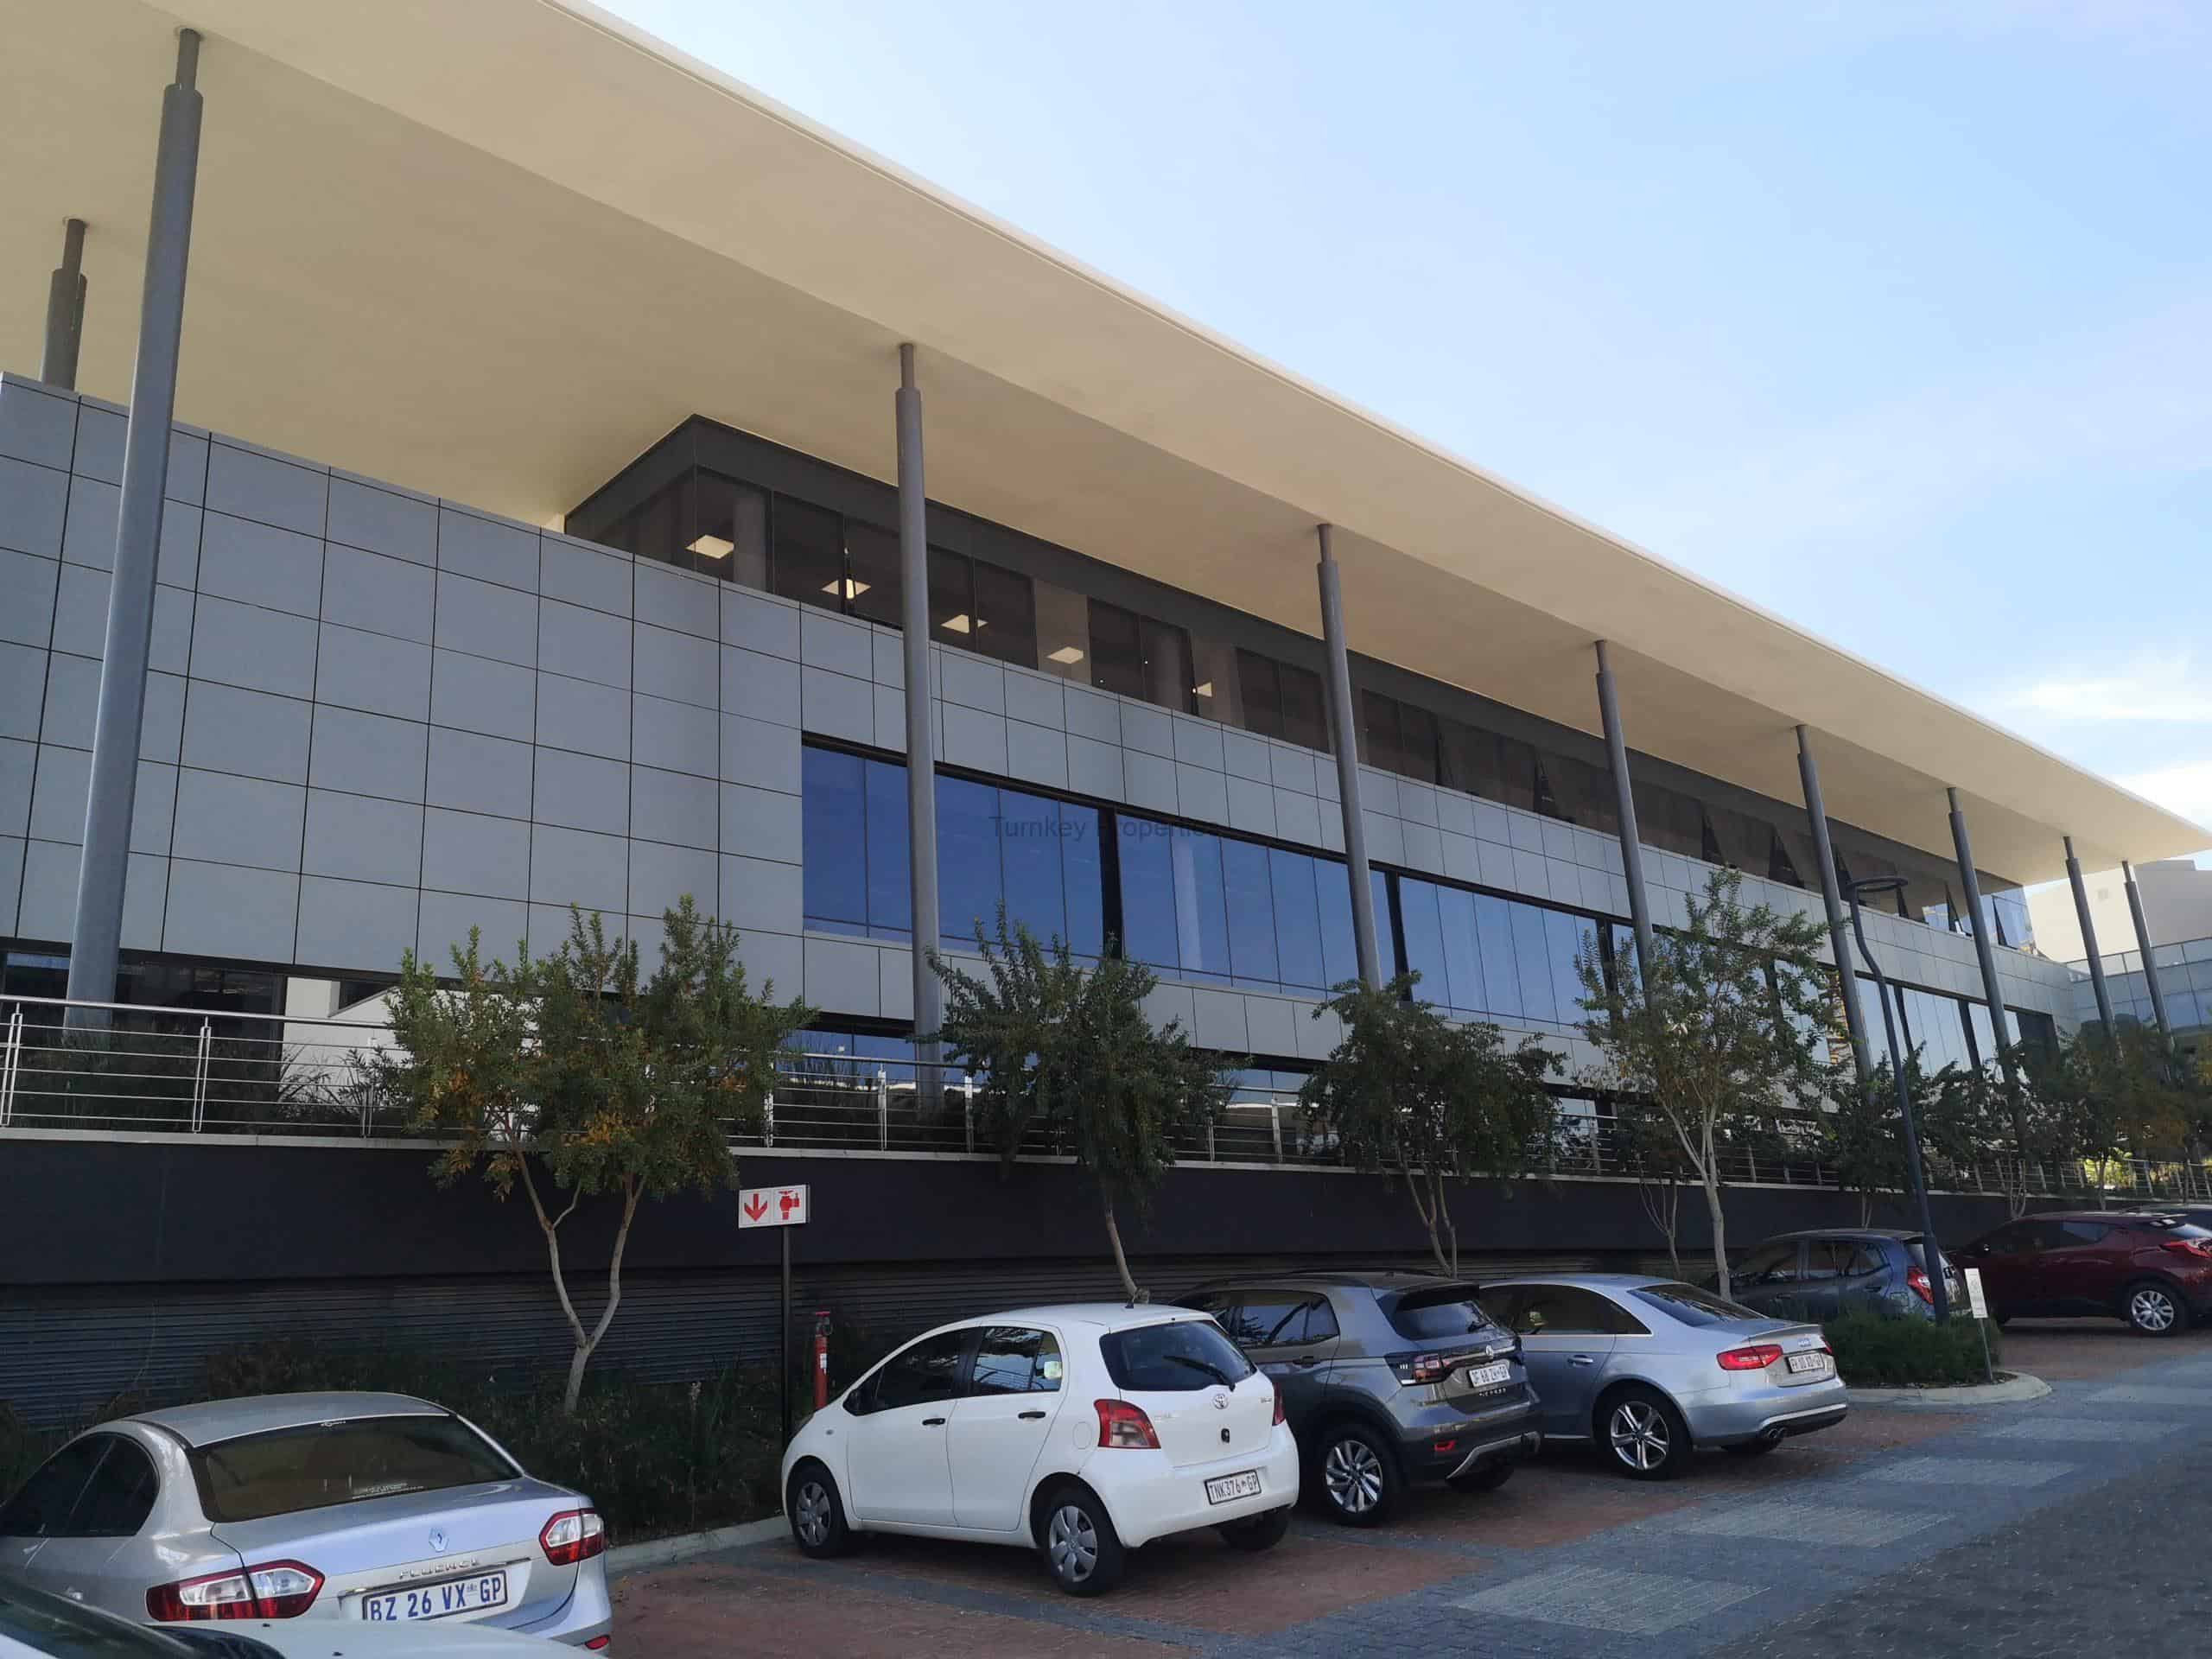 424m² office to let midrand Corporate Campus (reduced rental)